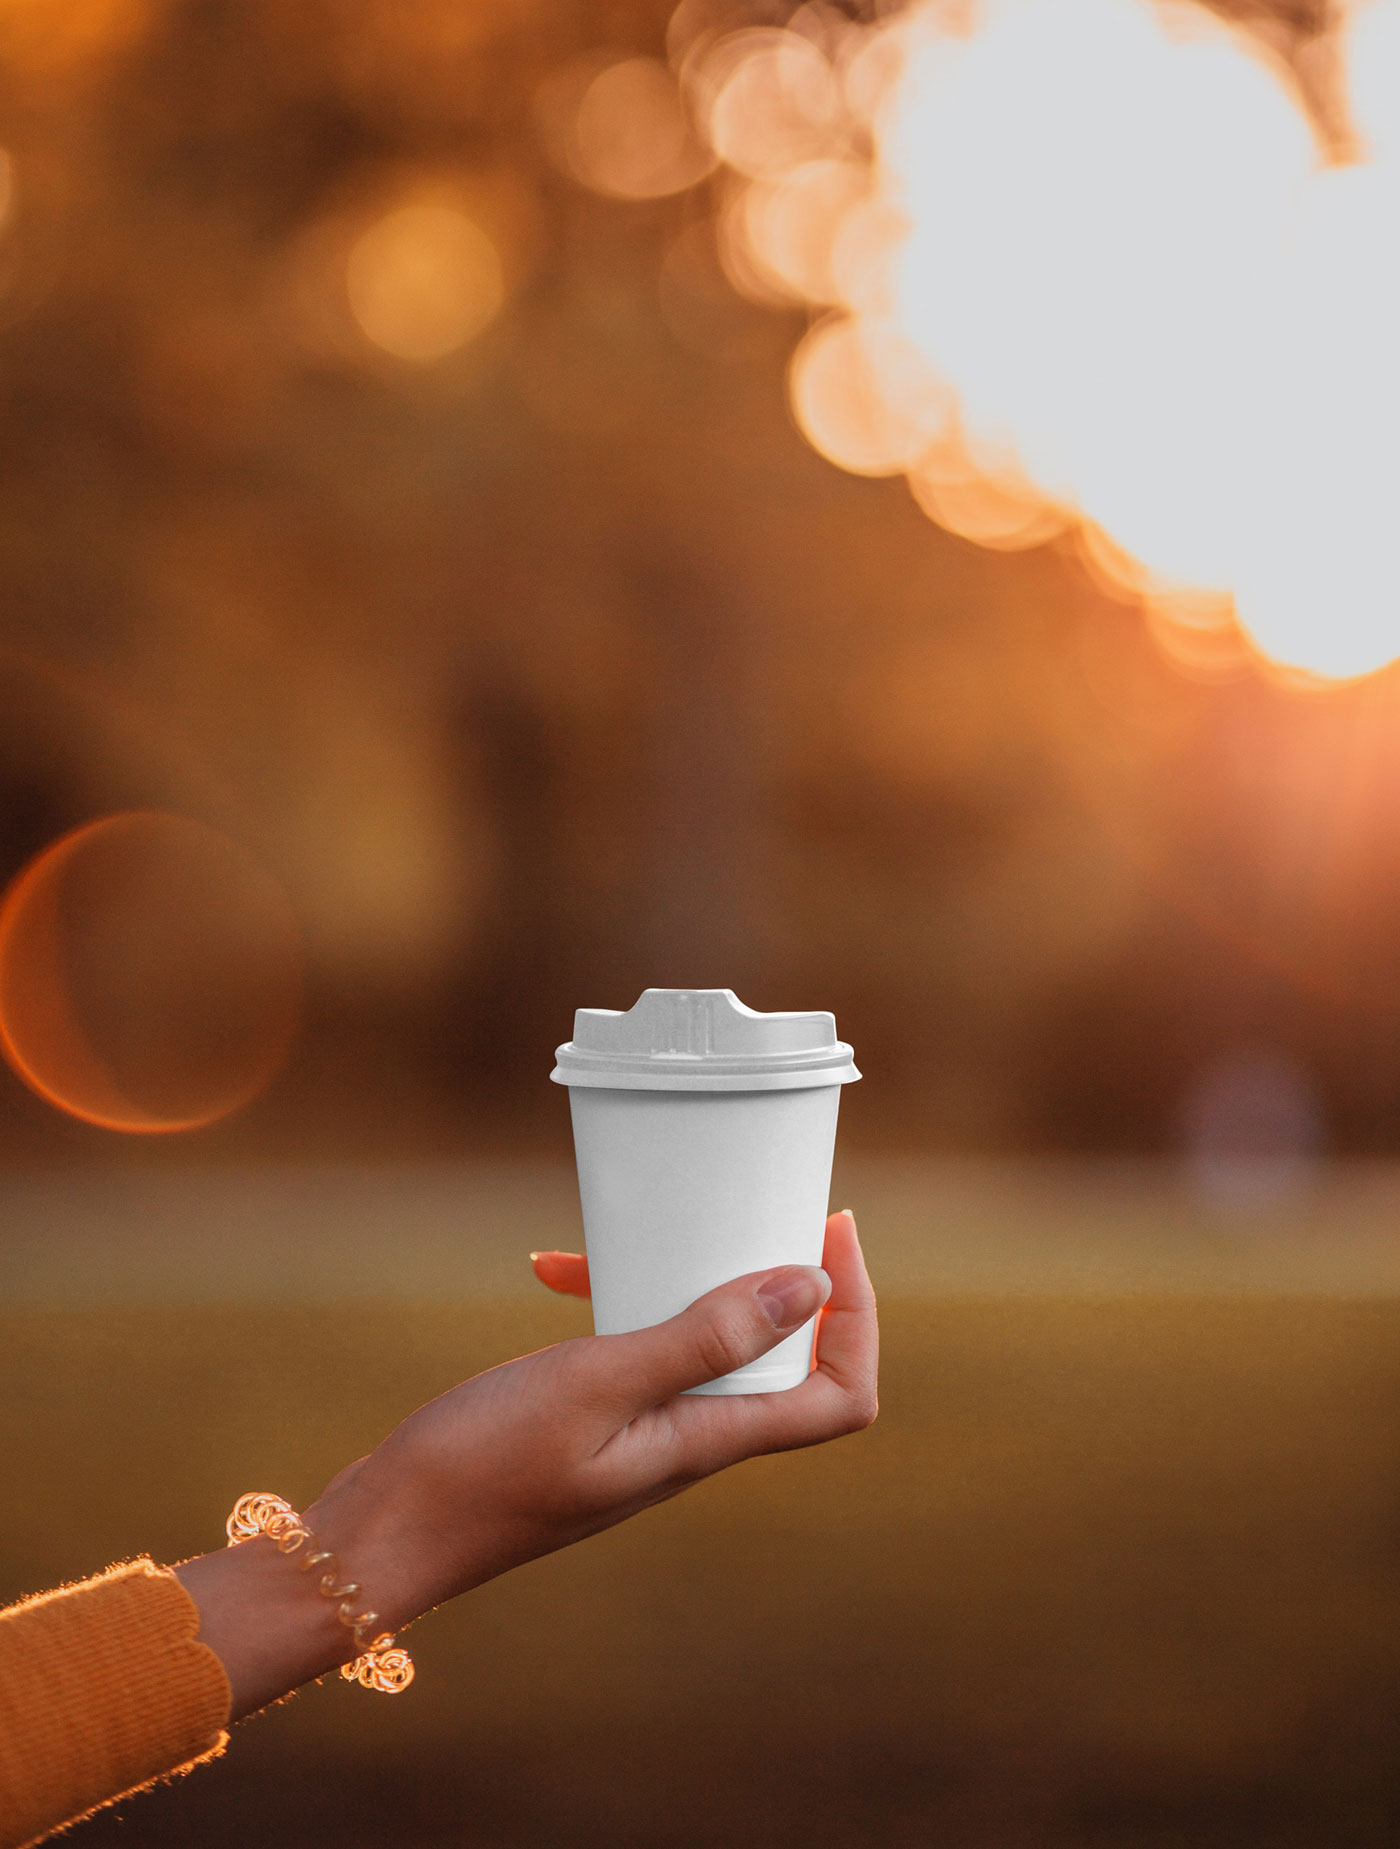 Front View of Small Woman Hand Holding Coffee Cup Mockup FREE PSD